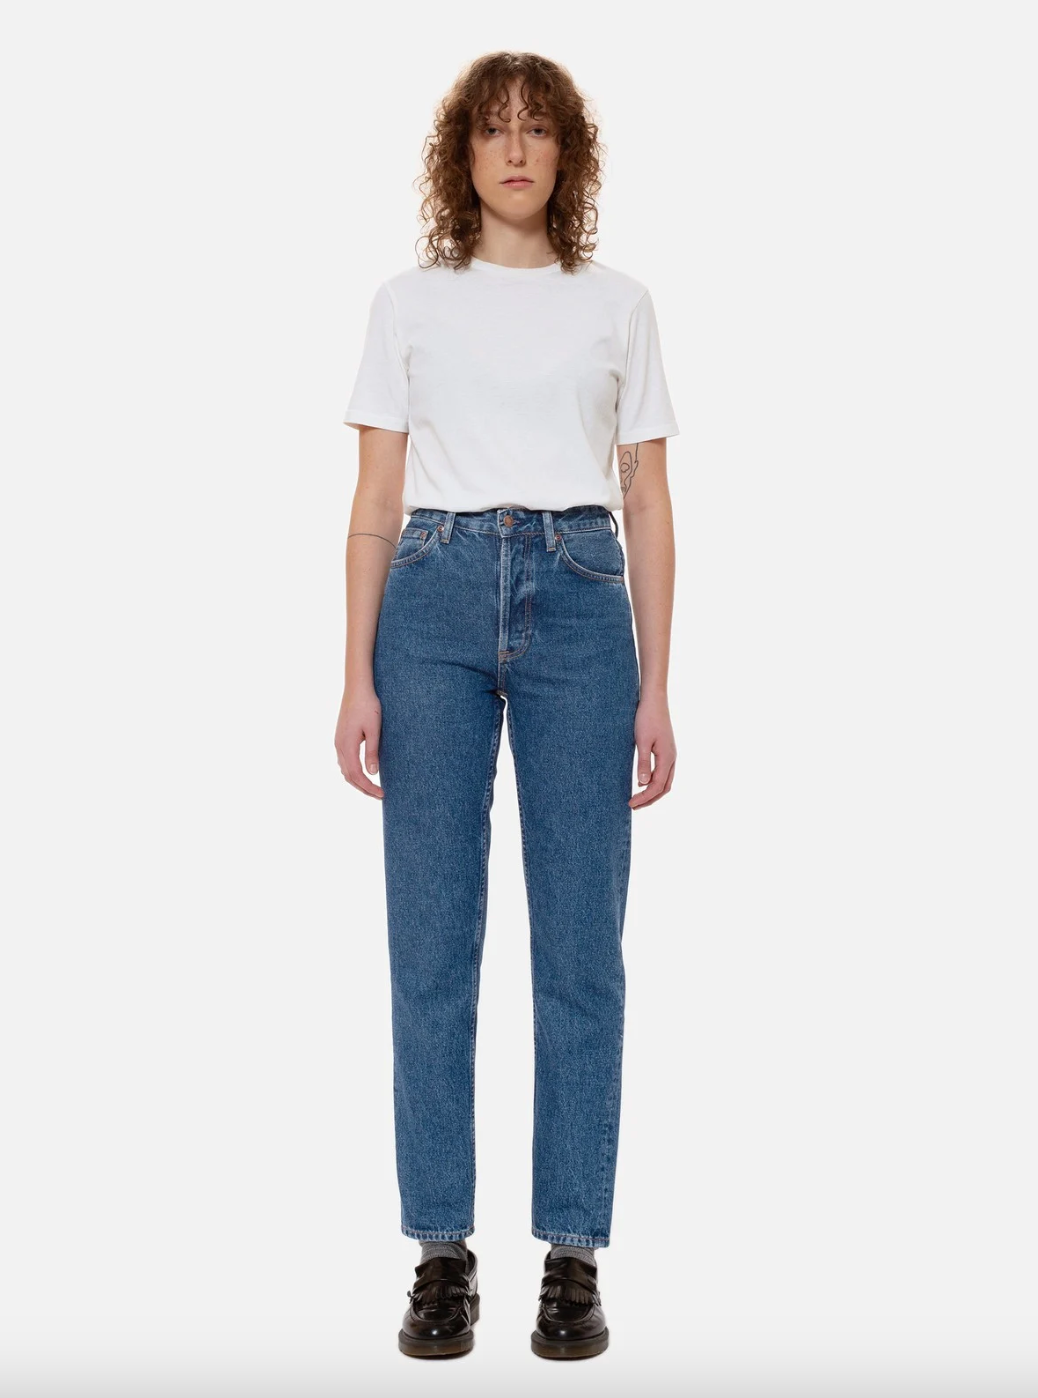 Everlane + The Authentic Stretch Skinny Bootcut